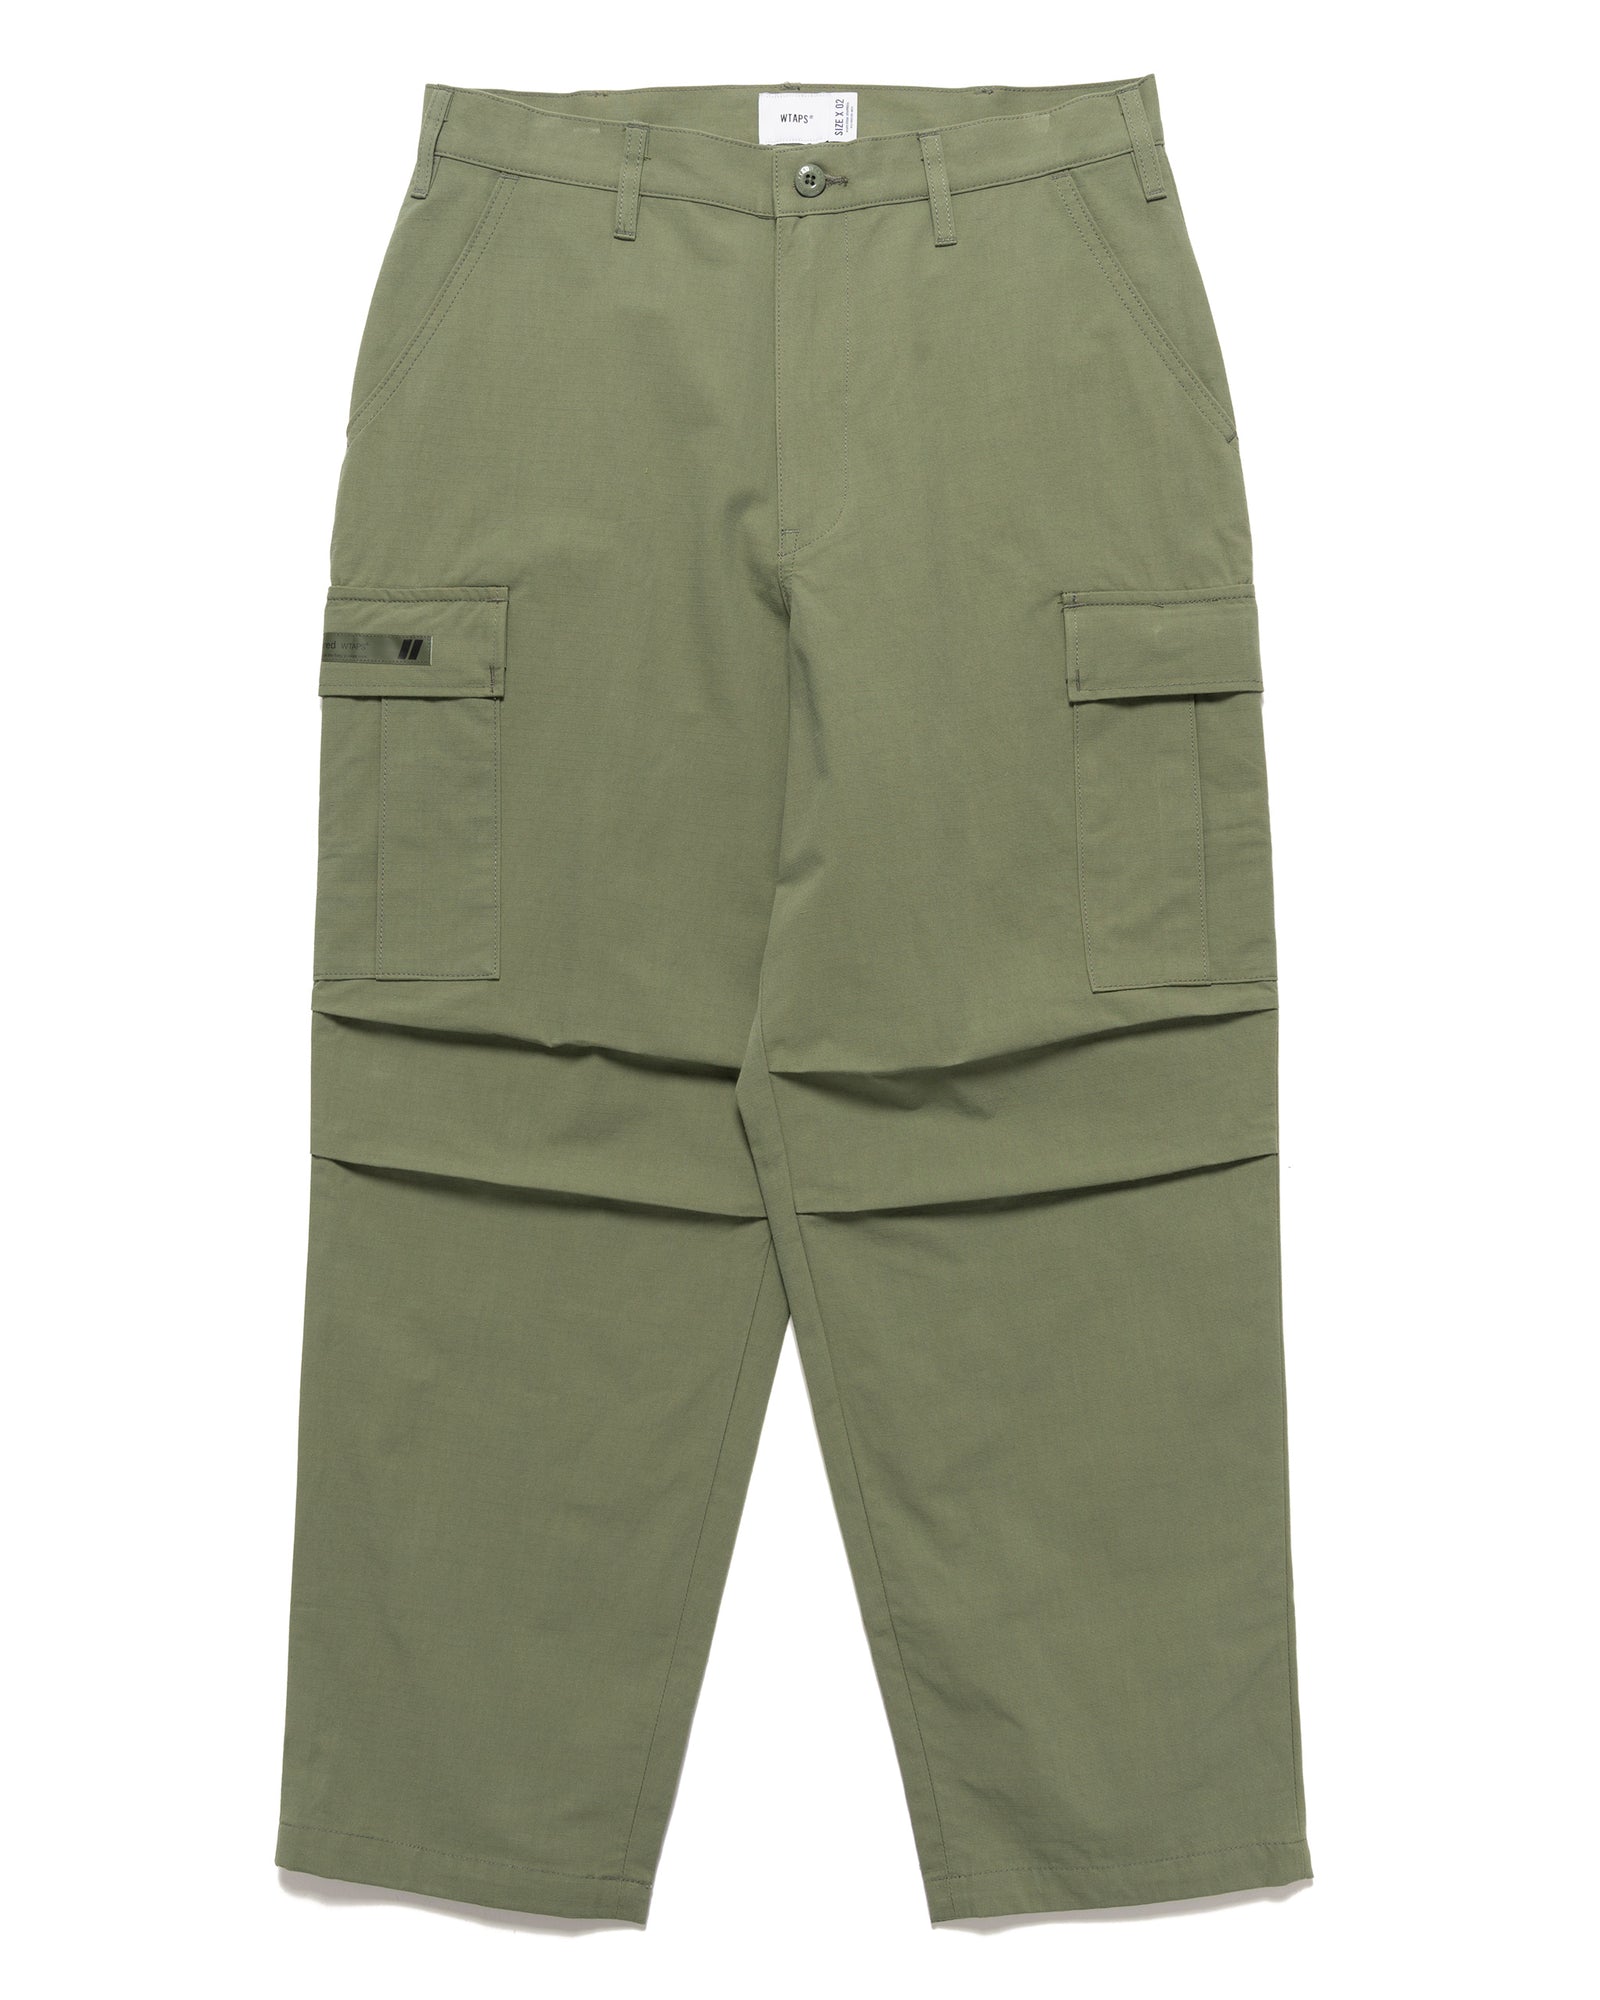 MILT9601 / Trousers / Nyco. Ripstop Black | HAVEN